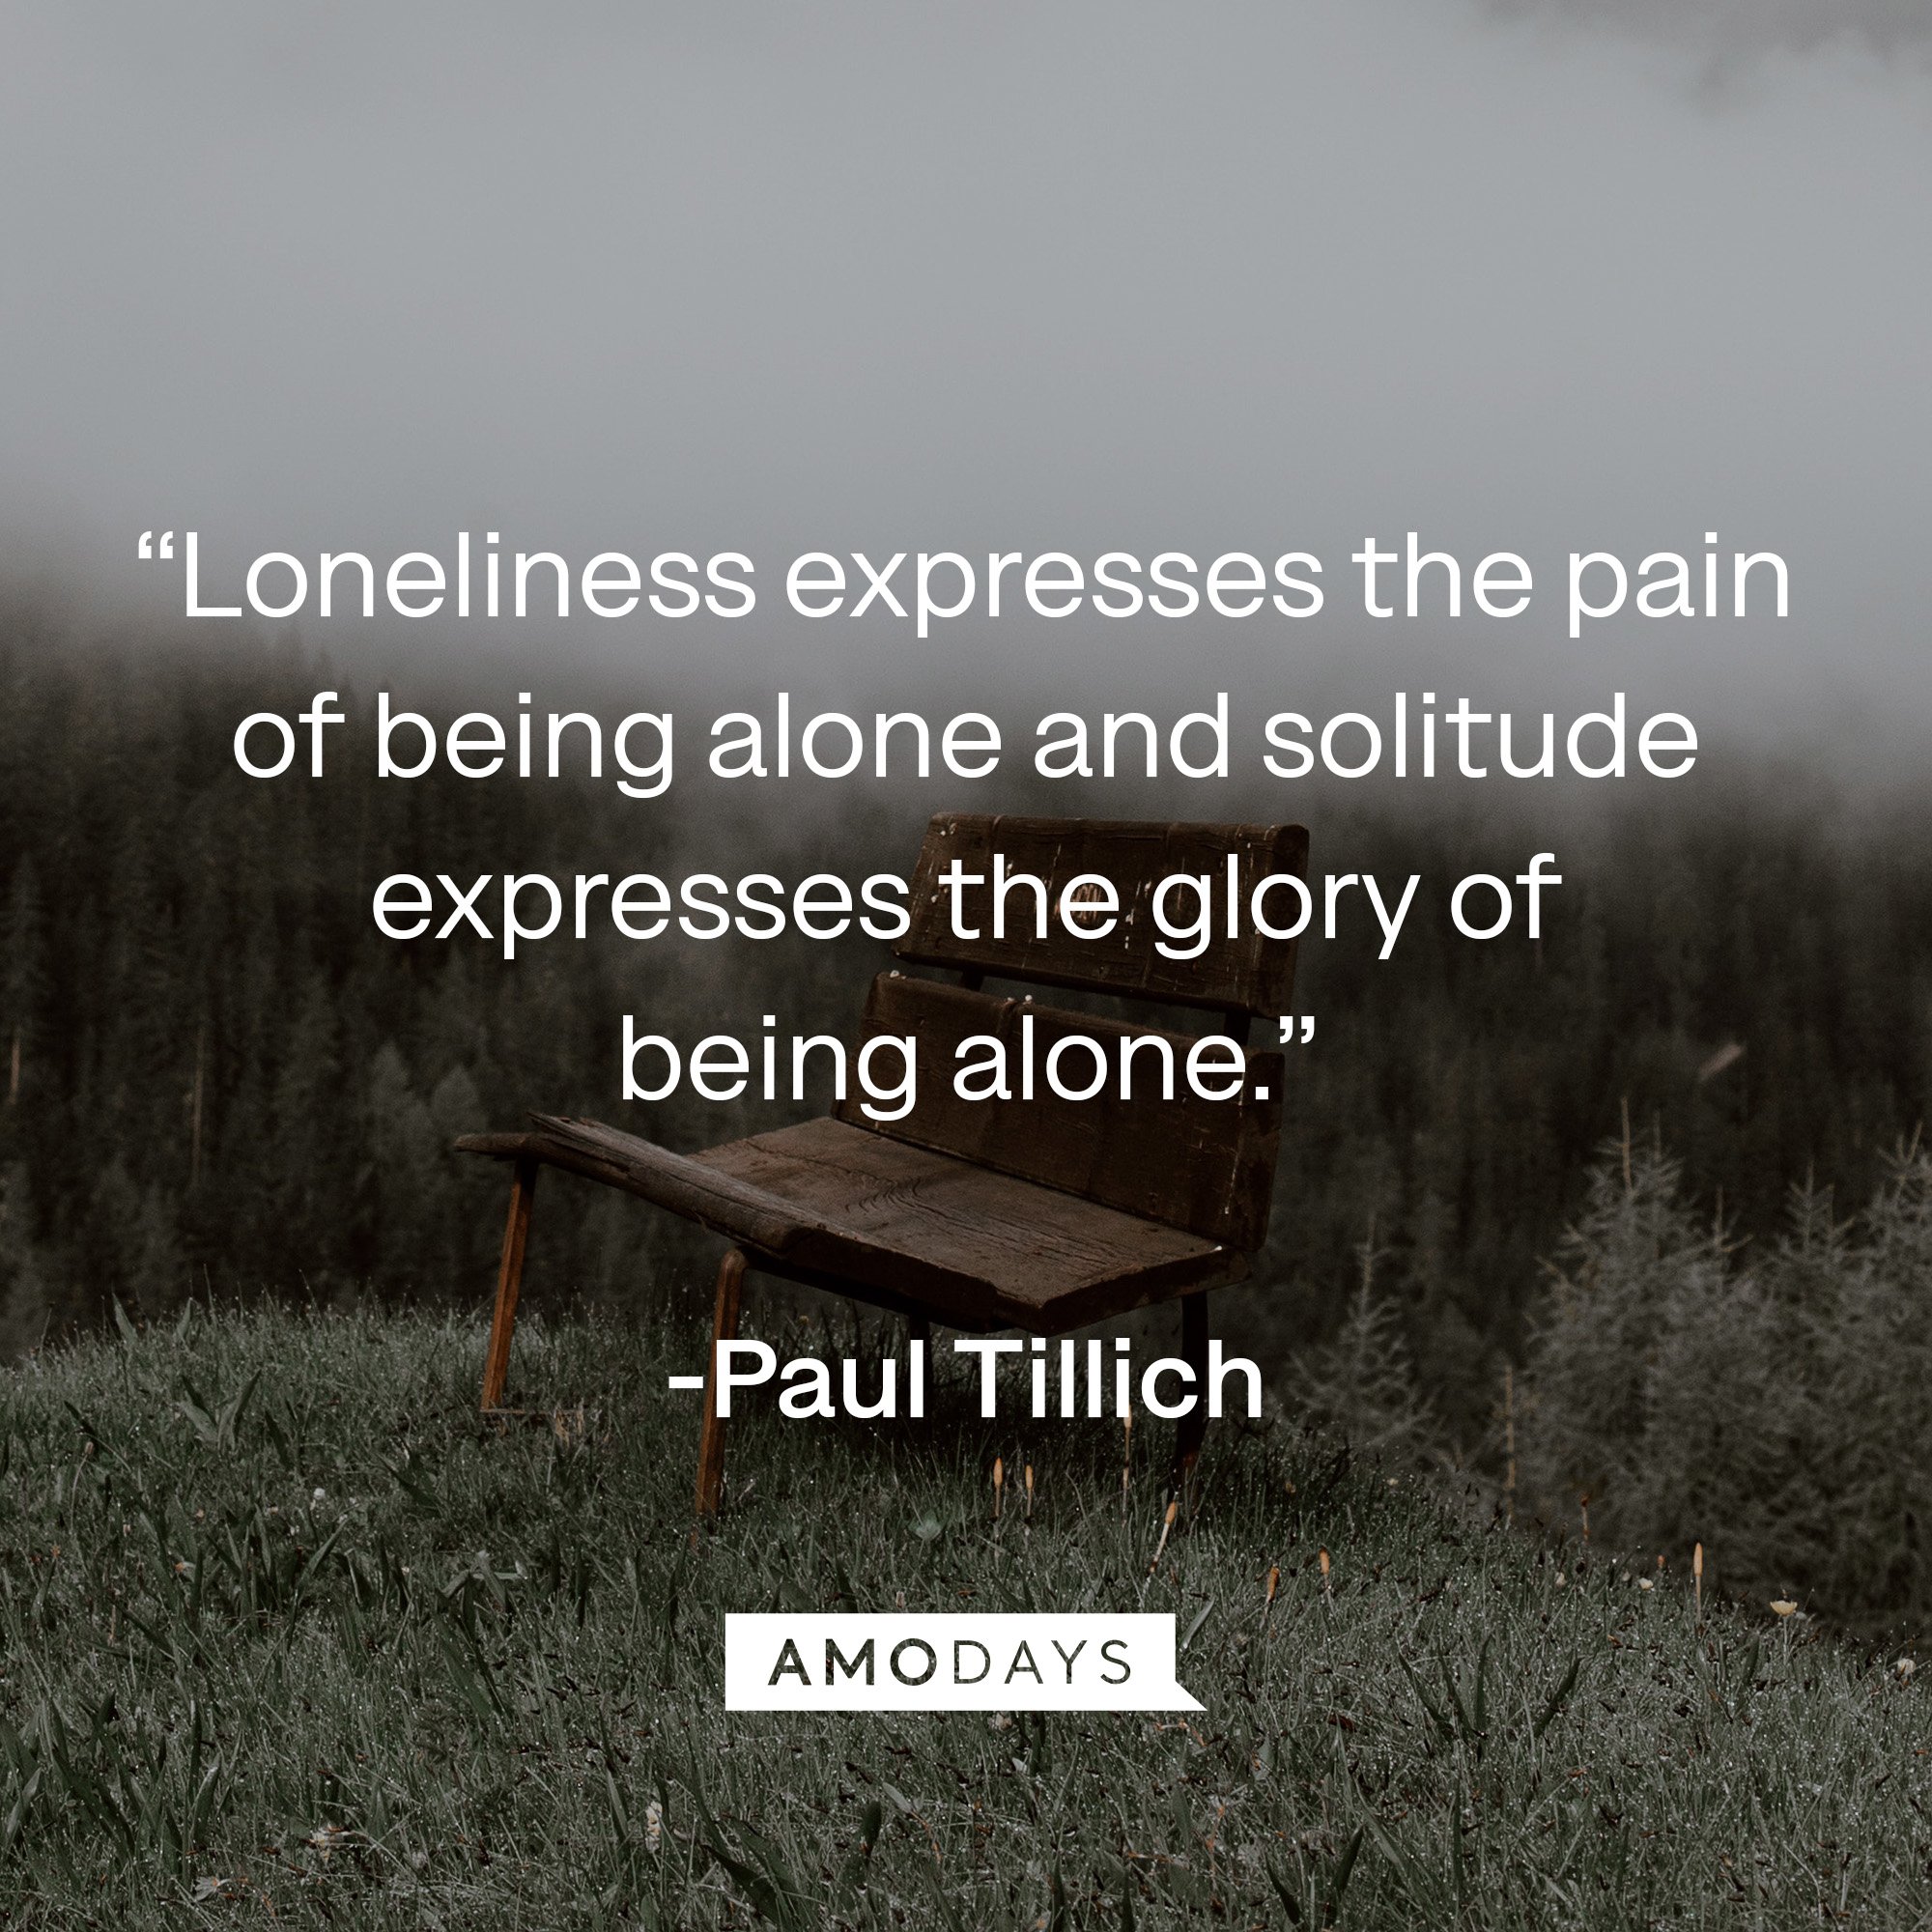 Paul Tillich’s quote: “Loneliness expresses the pain of being alone and solitude expresses the glory of being alone.” | Image: Amodays